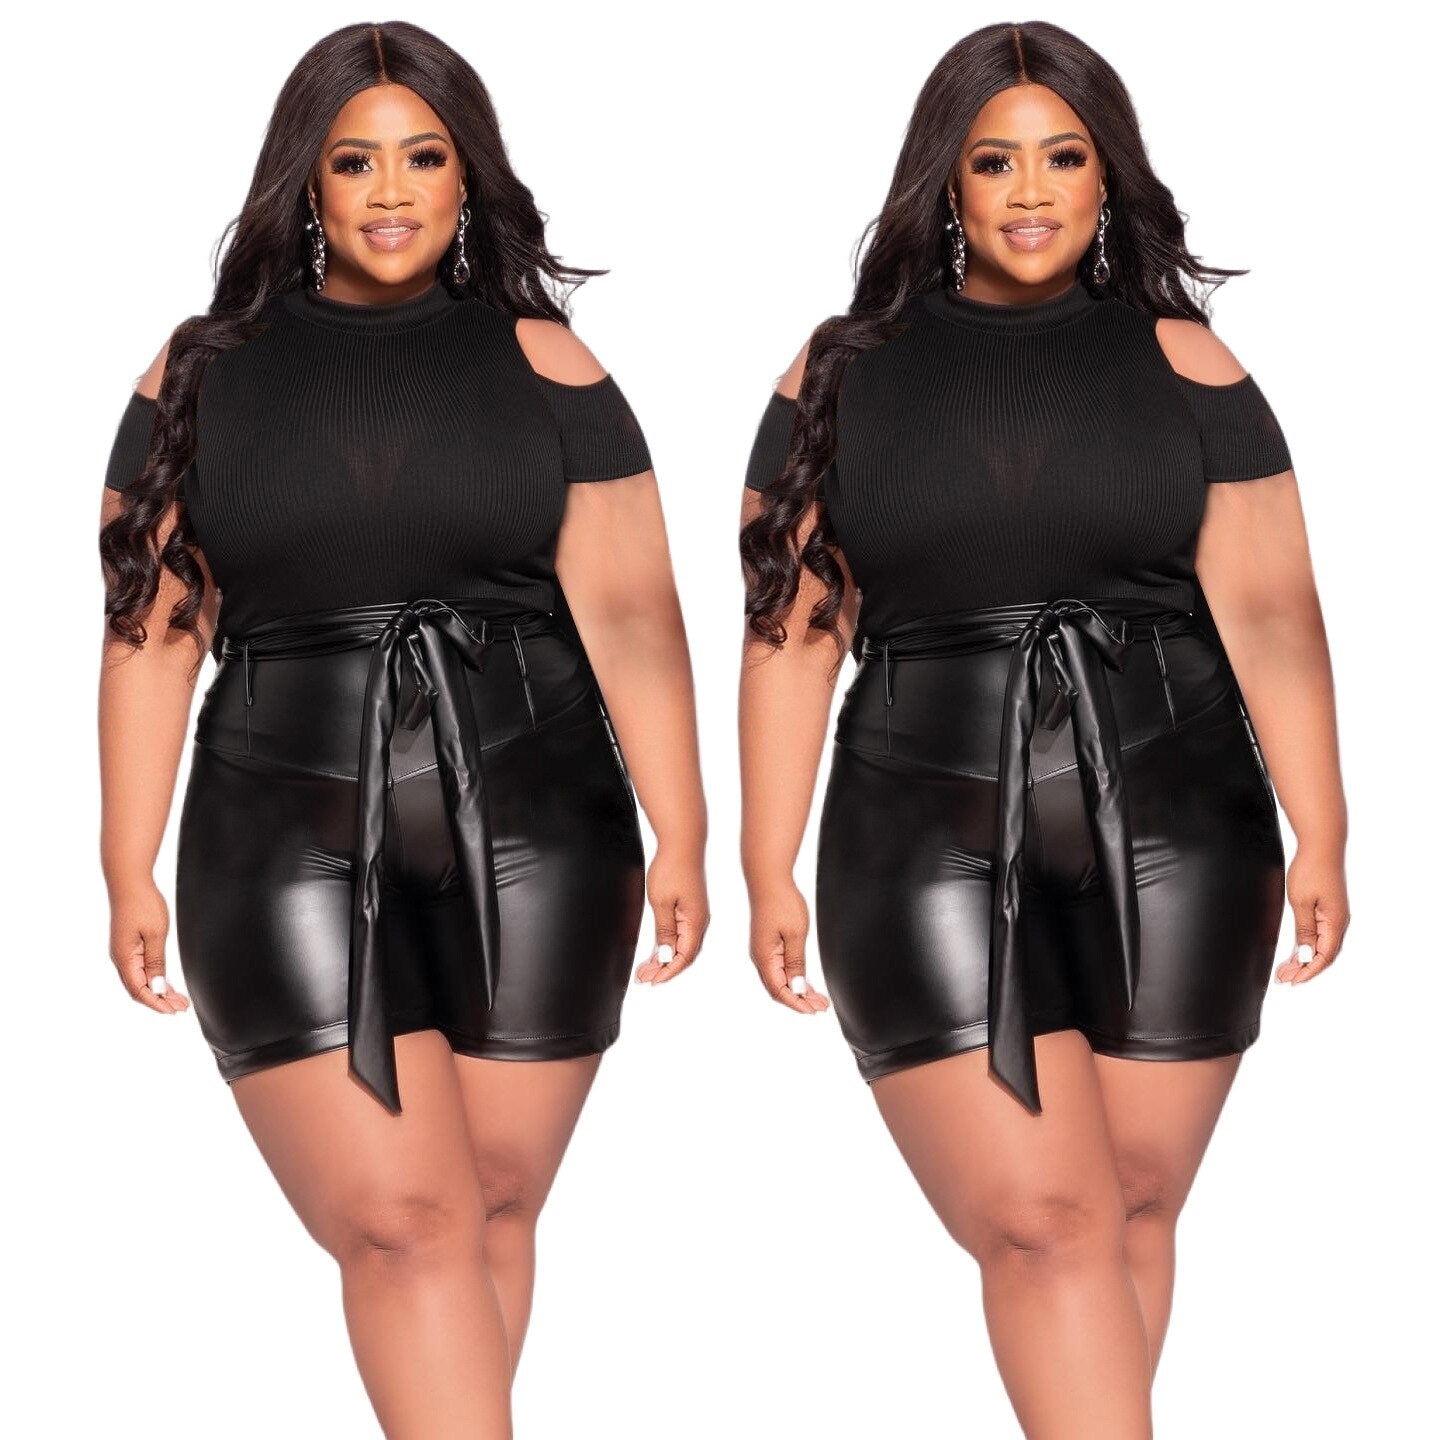 Aovica Plus Size Fashion Two Pieces Set Short Sleeve Hollow Out Top PU Lace Up Shorts With Zipper Women Tracksuit Casual Outdoor Outfit